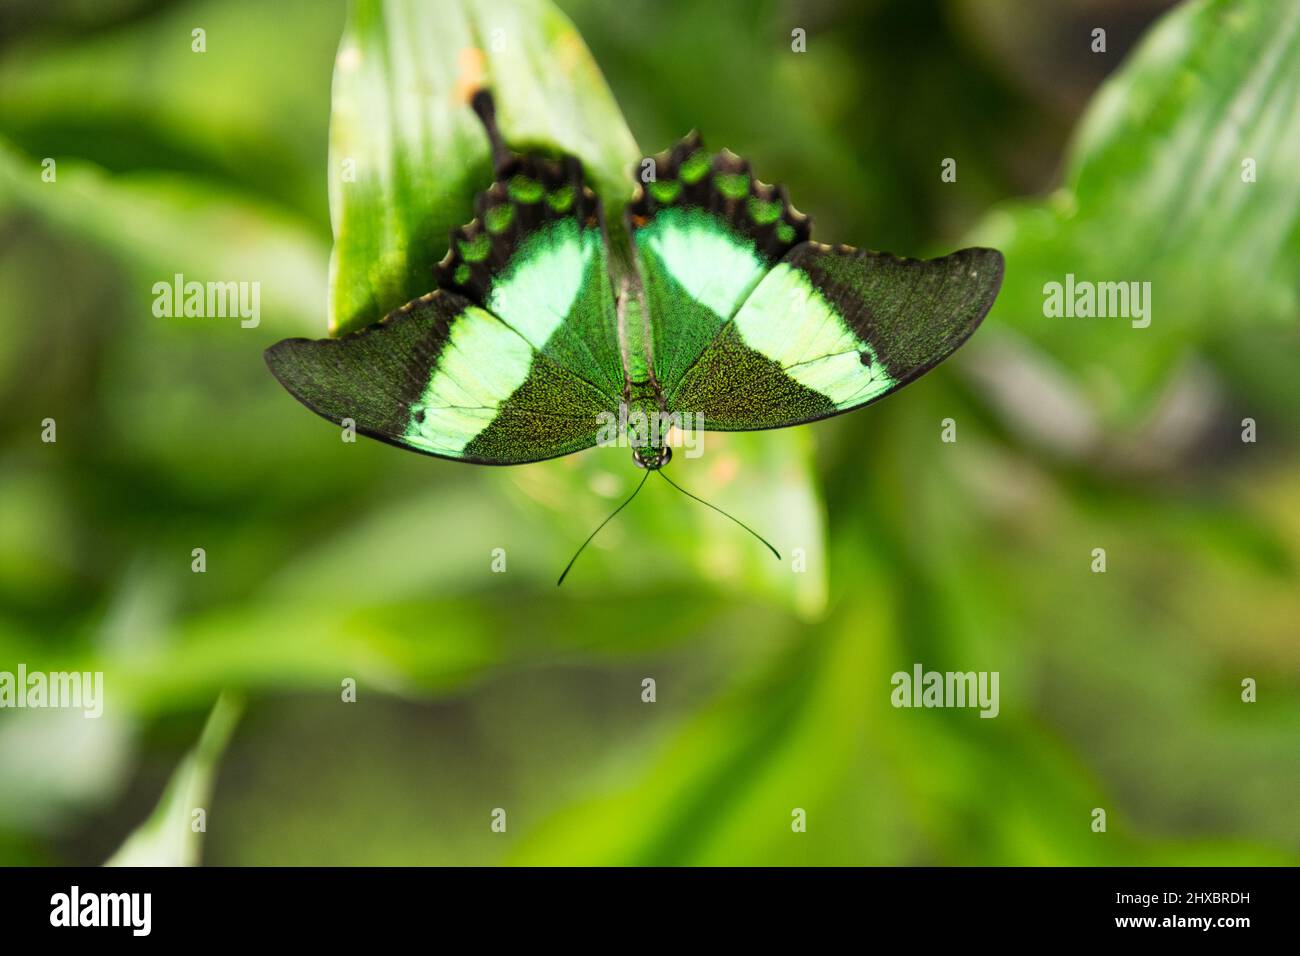 Green butterfly emerald swallowtail with open wings on blurry nature natural background Stock Photo